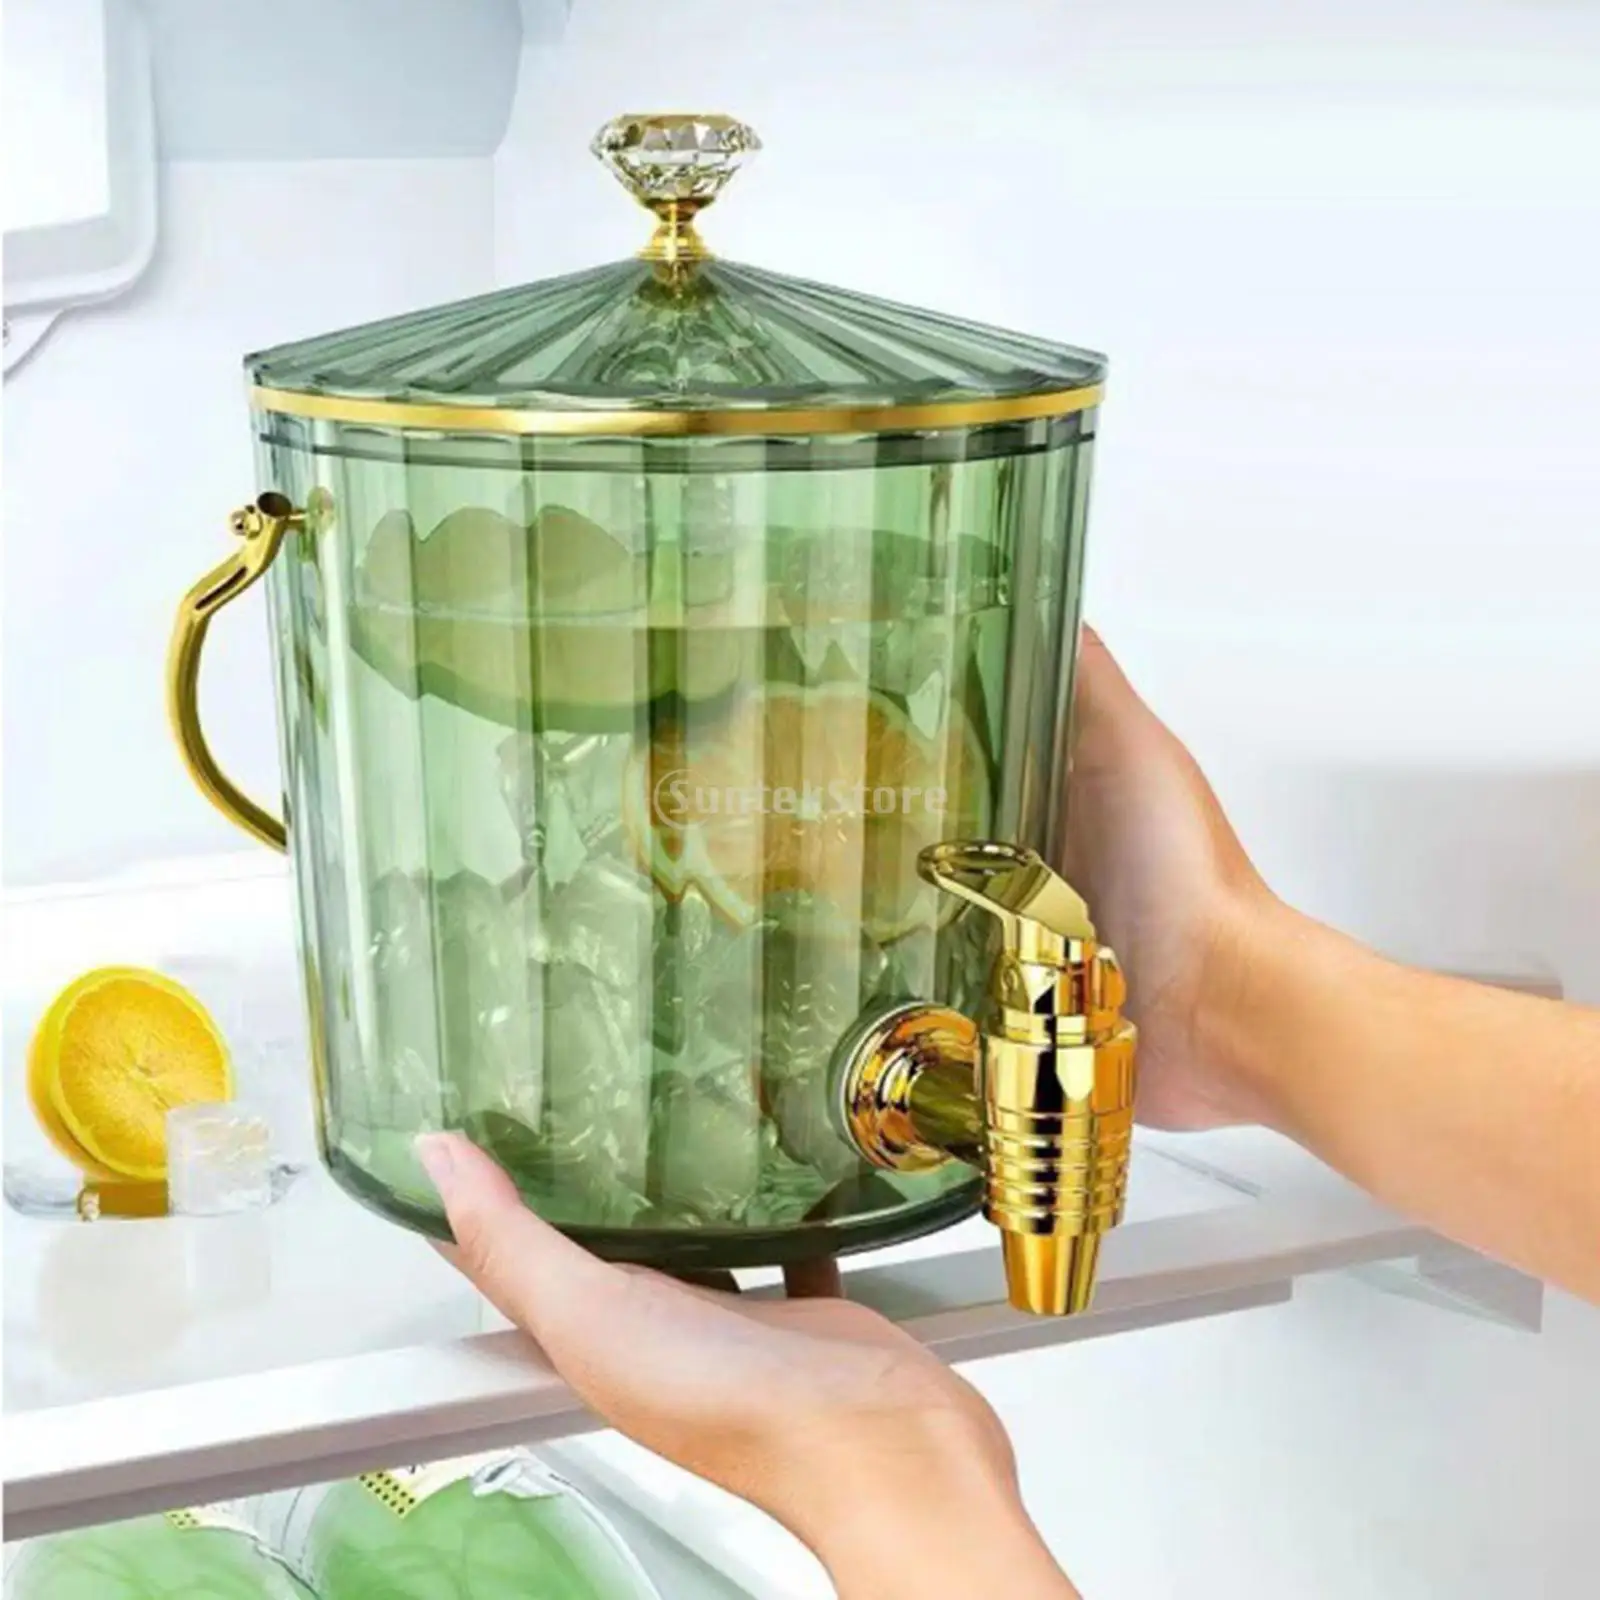 https://ae01.alicdn.com/kf/S4504abf5ec174b338ad99be387f0fbb3O/2L-Large-Capacity-Drink-Dispenser-Cold-Kettle-with-Faucet-Iced-Beverage-Dispenser-for-Home-Party-Bar.jpg